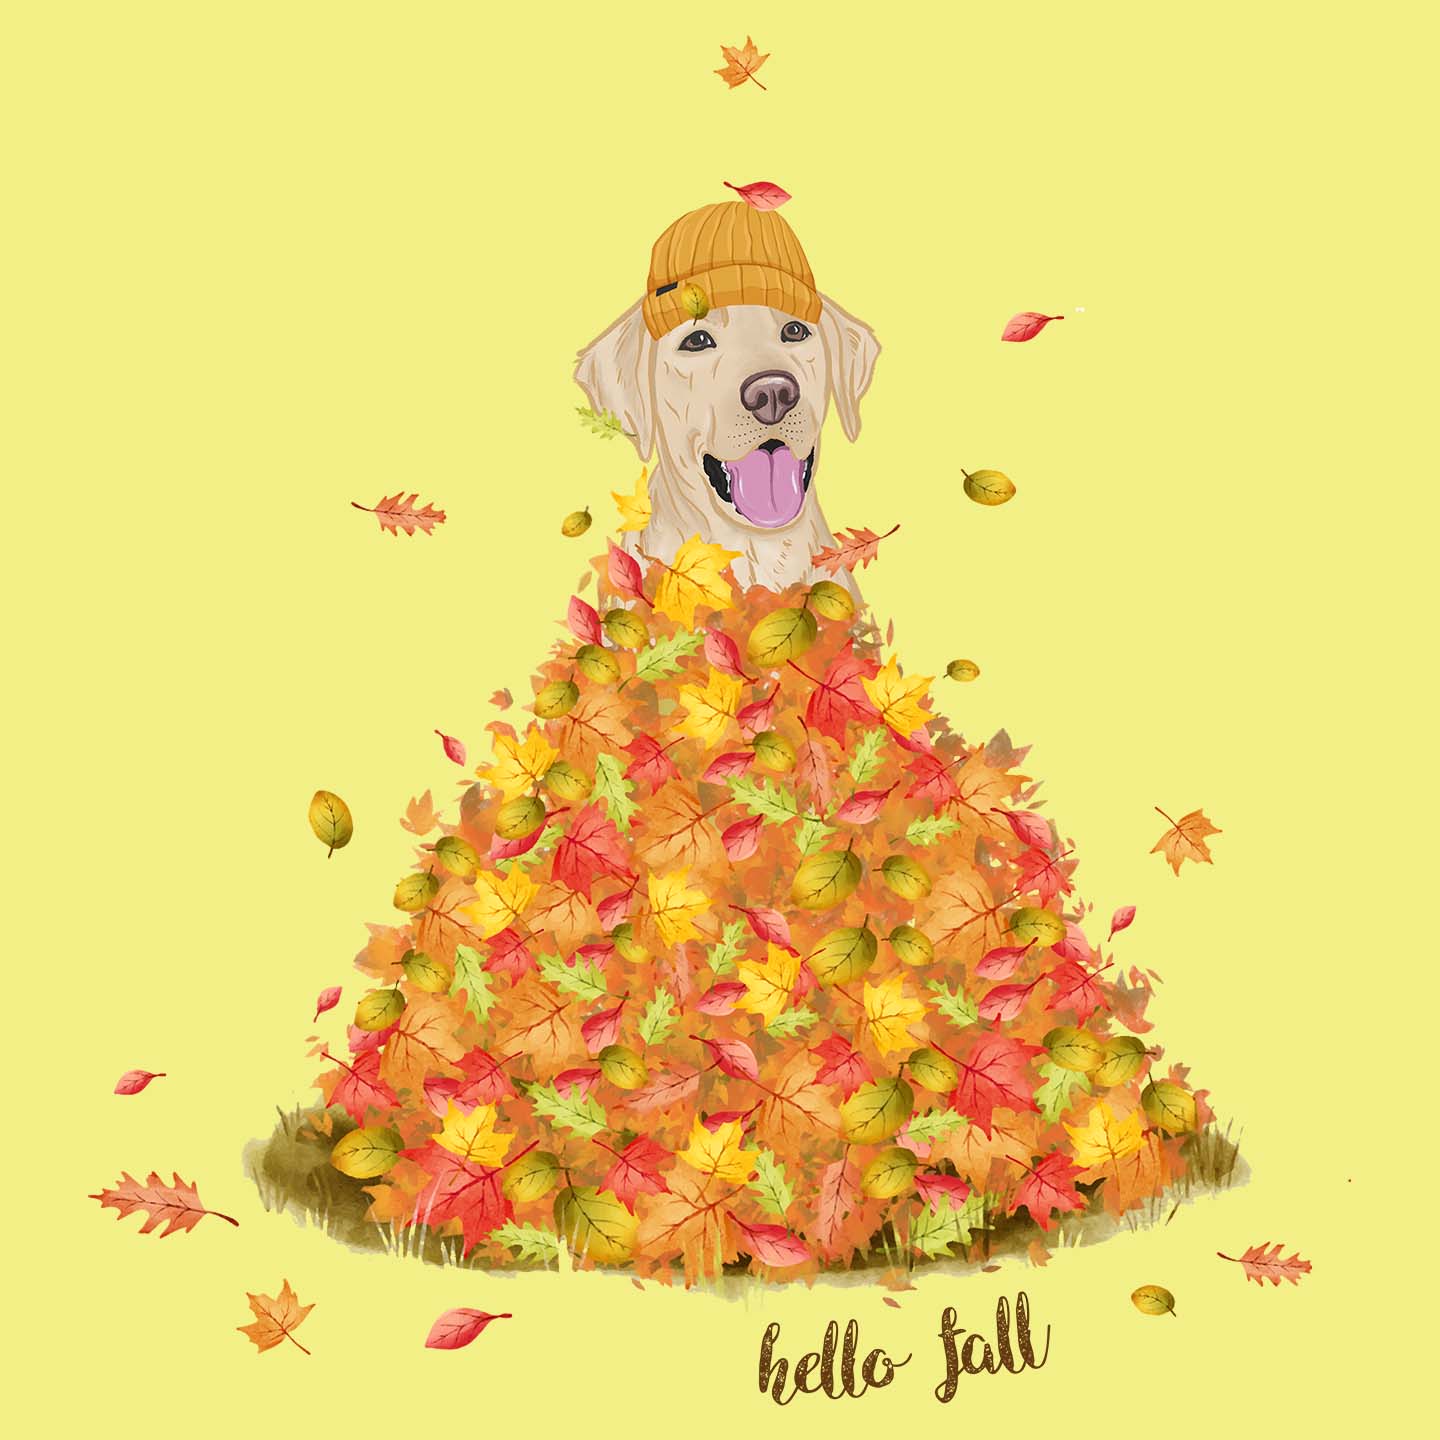 Leaf Pile and Yellow Lab - Women's Fitted T-Shirt